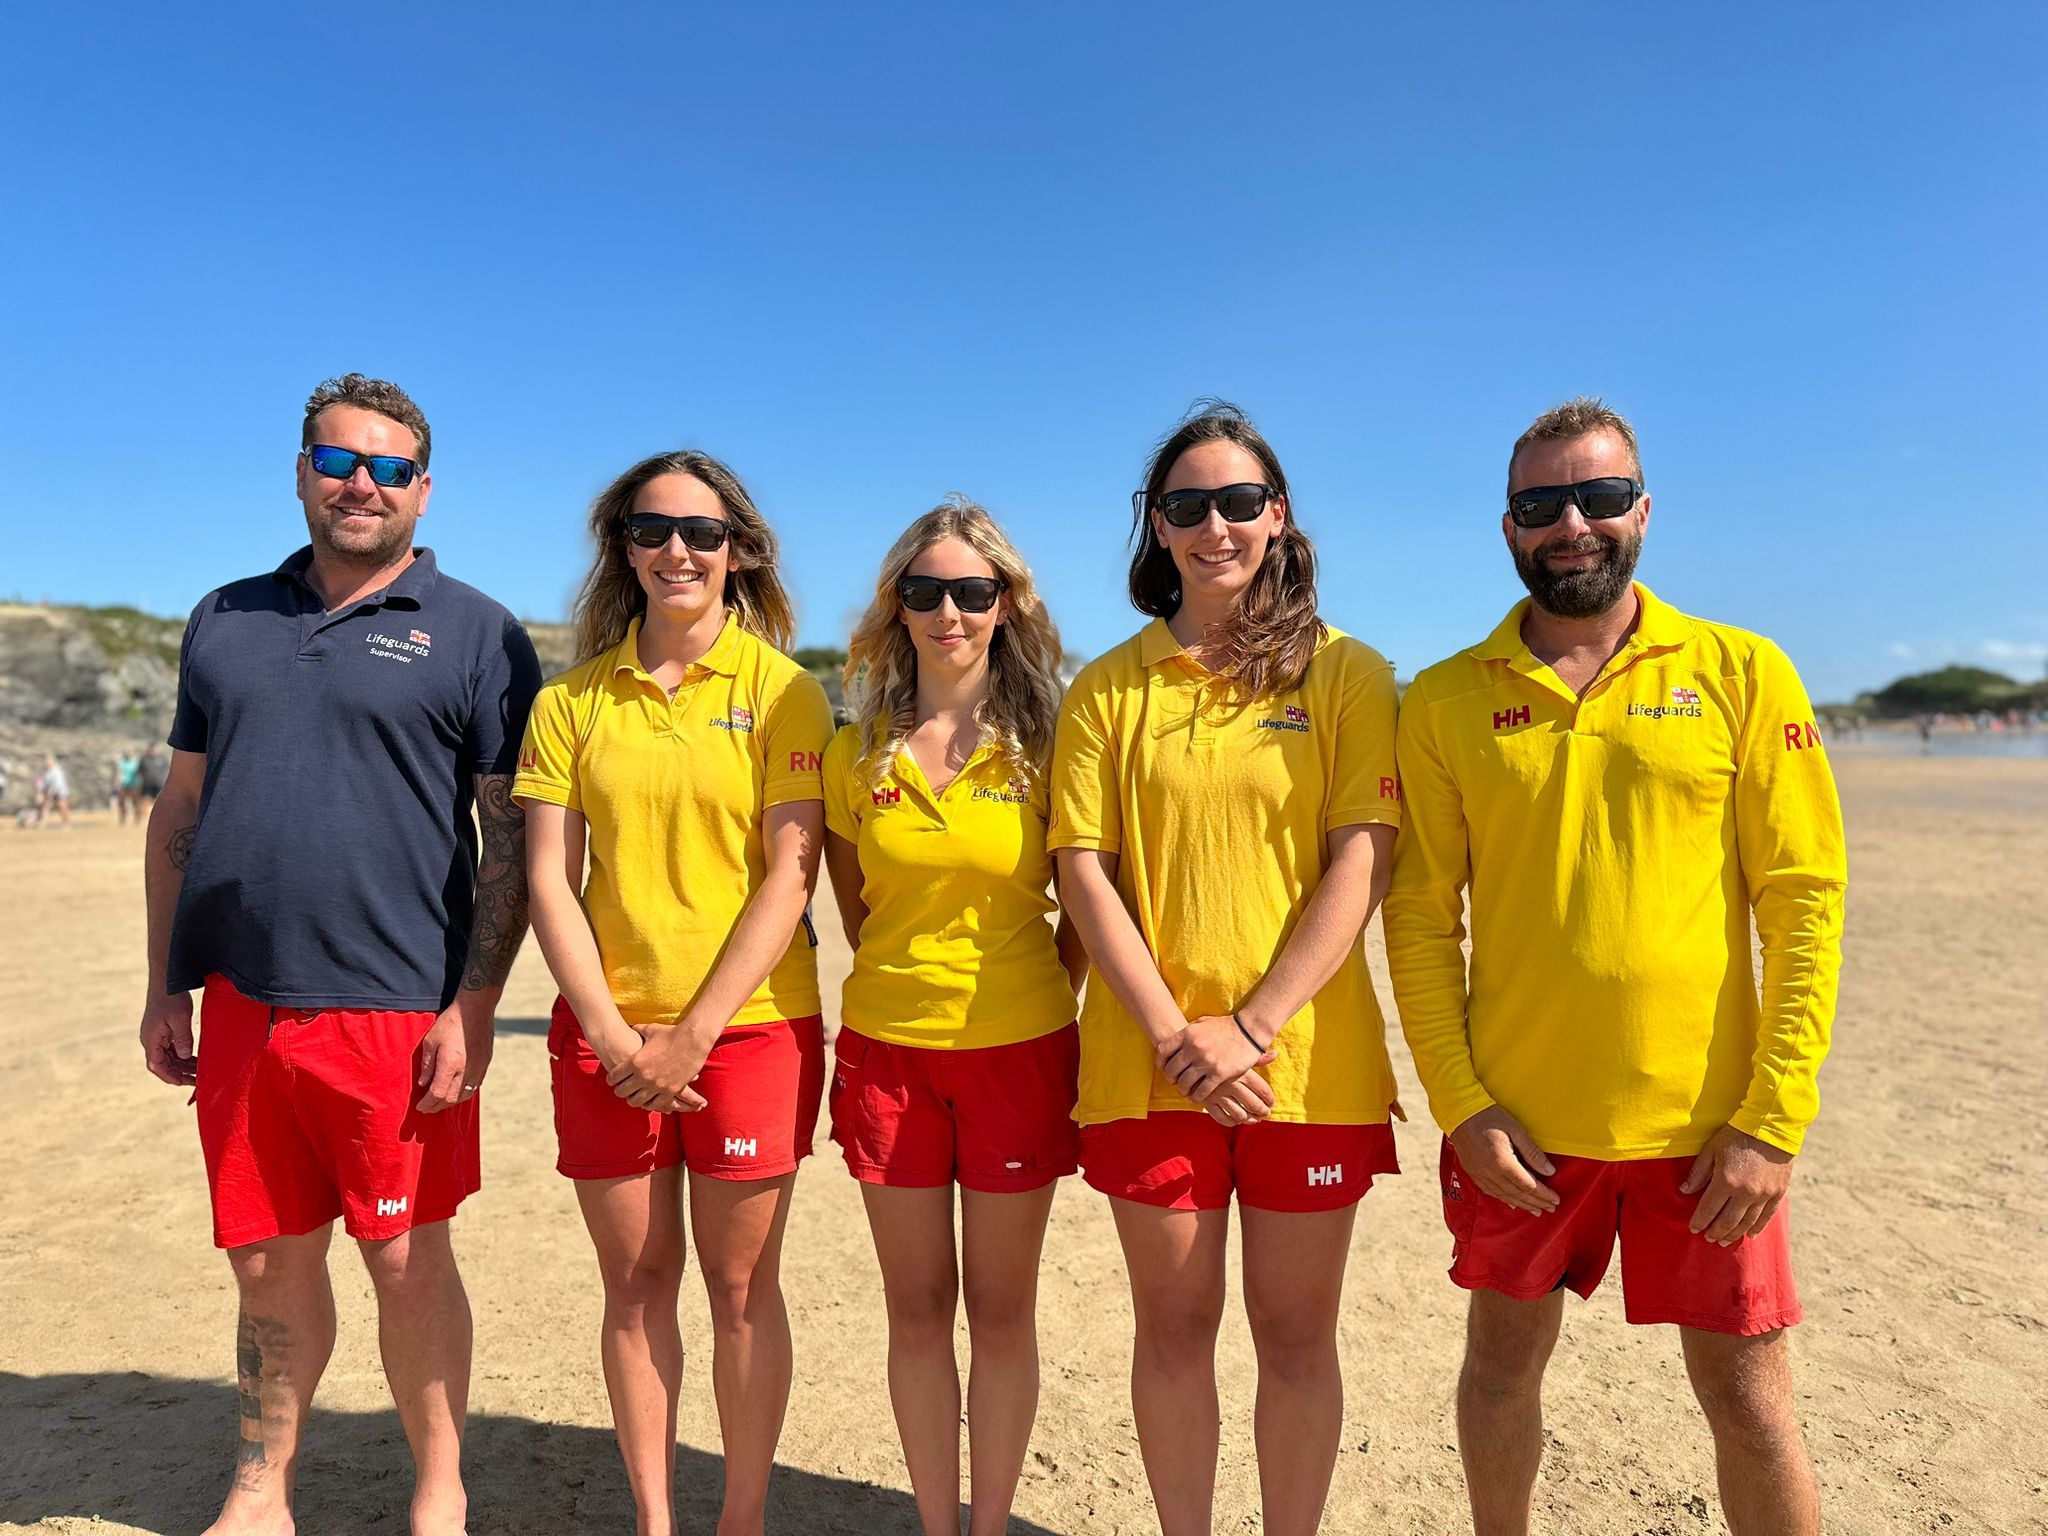 From left to right: Leon Bennett (lifeguard supervisor), Issey, Scarlet, Maisie and Gareth Barnes